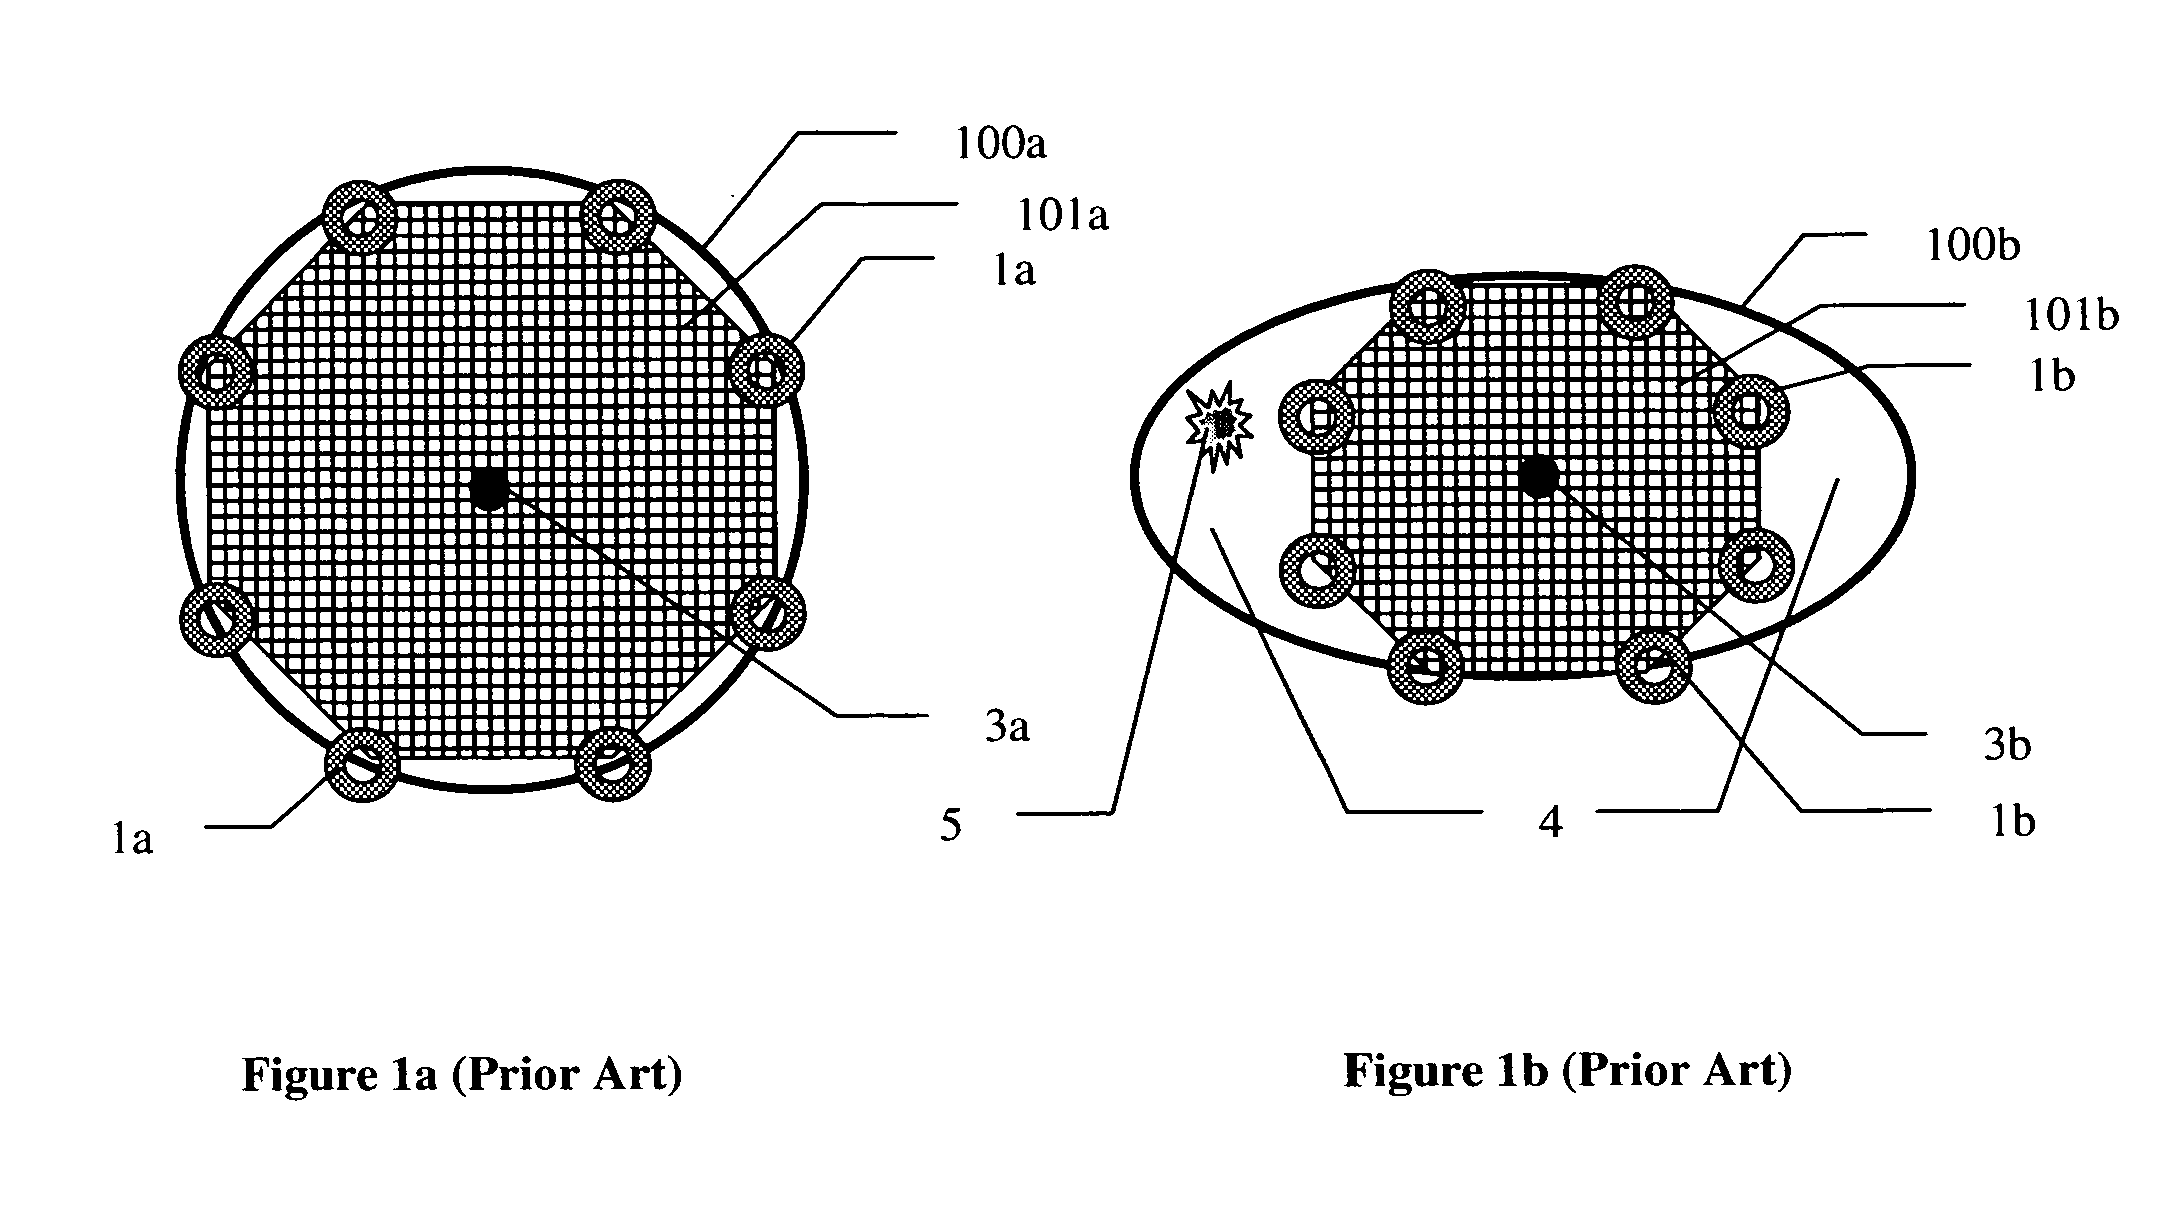 Distal protection apparatus with improved wall apposition